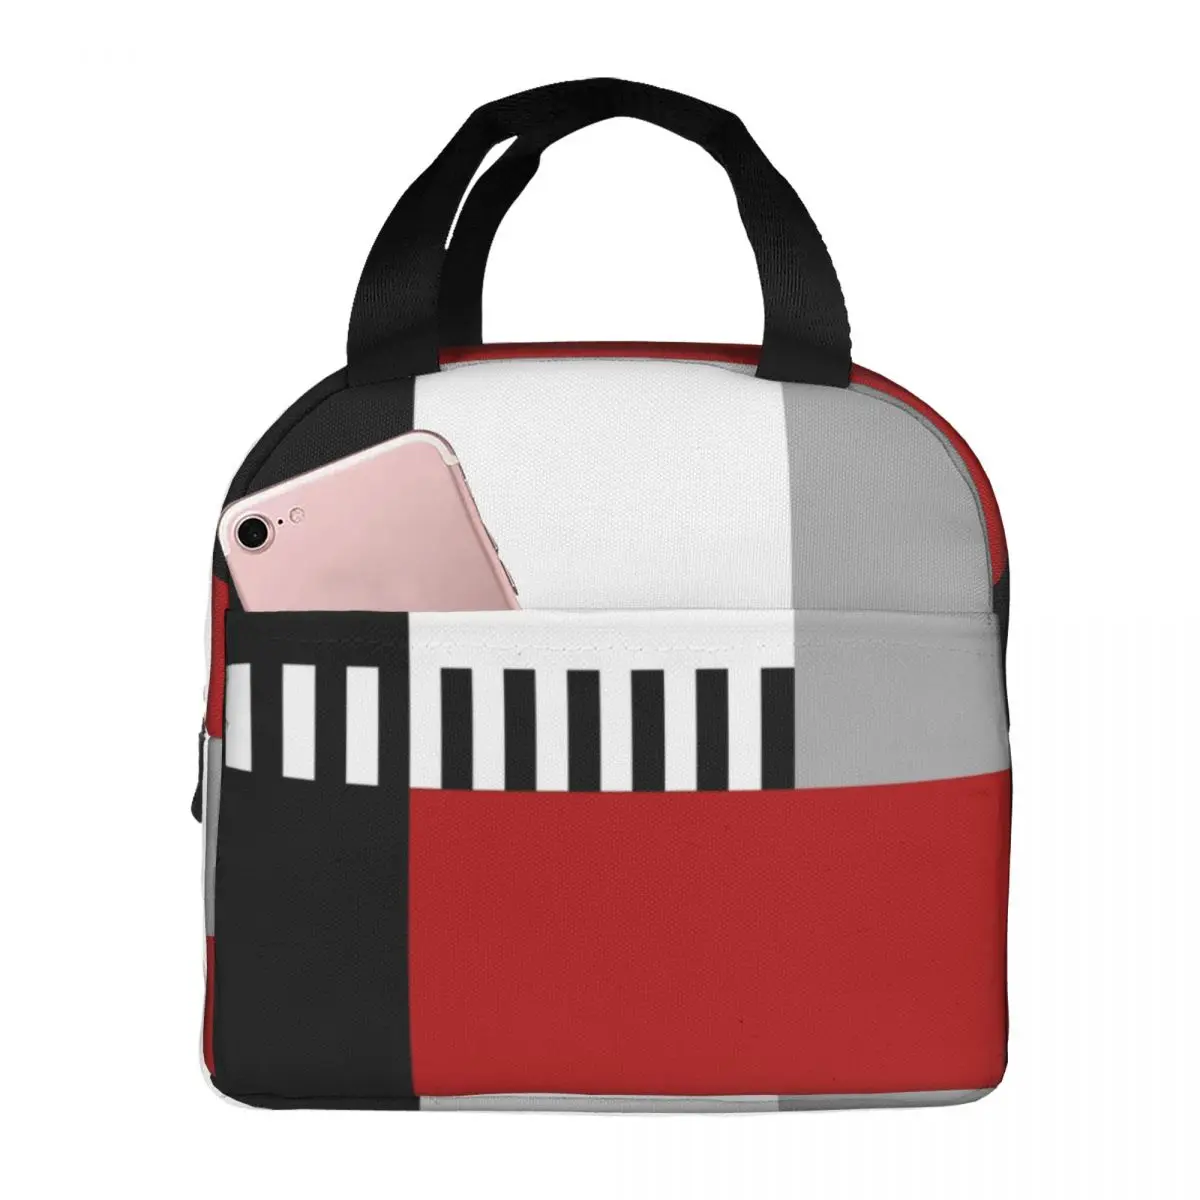 Geometric Pattern Red Series Lunch Bags Portable Insulated Oxford Cooler Bags Abstract Thermal School Lunch Box for Women Girl